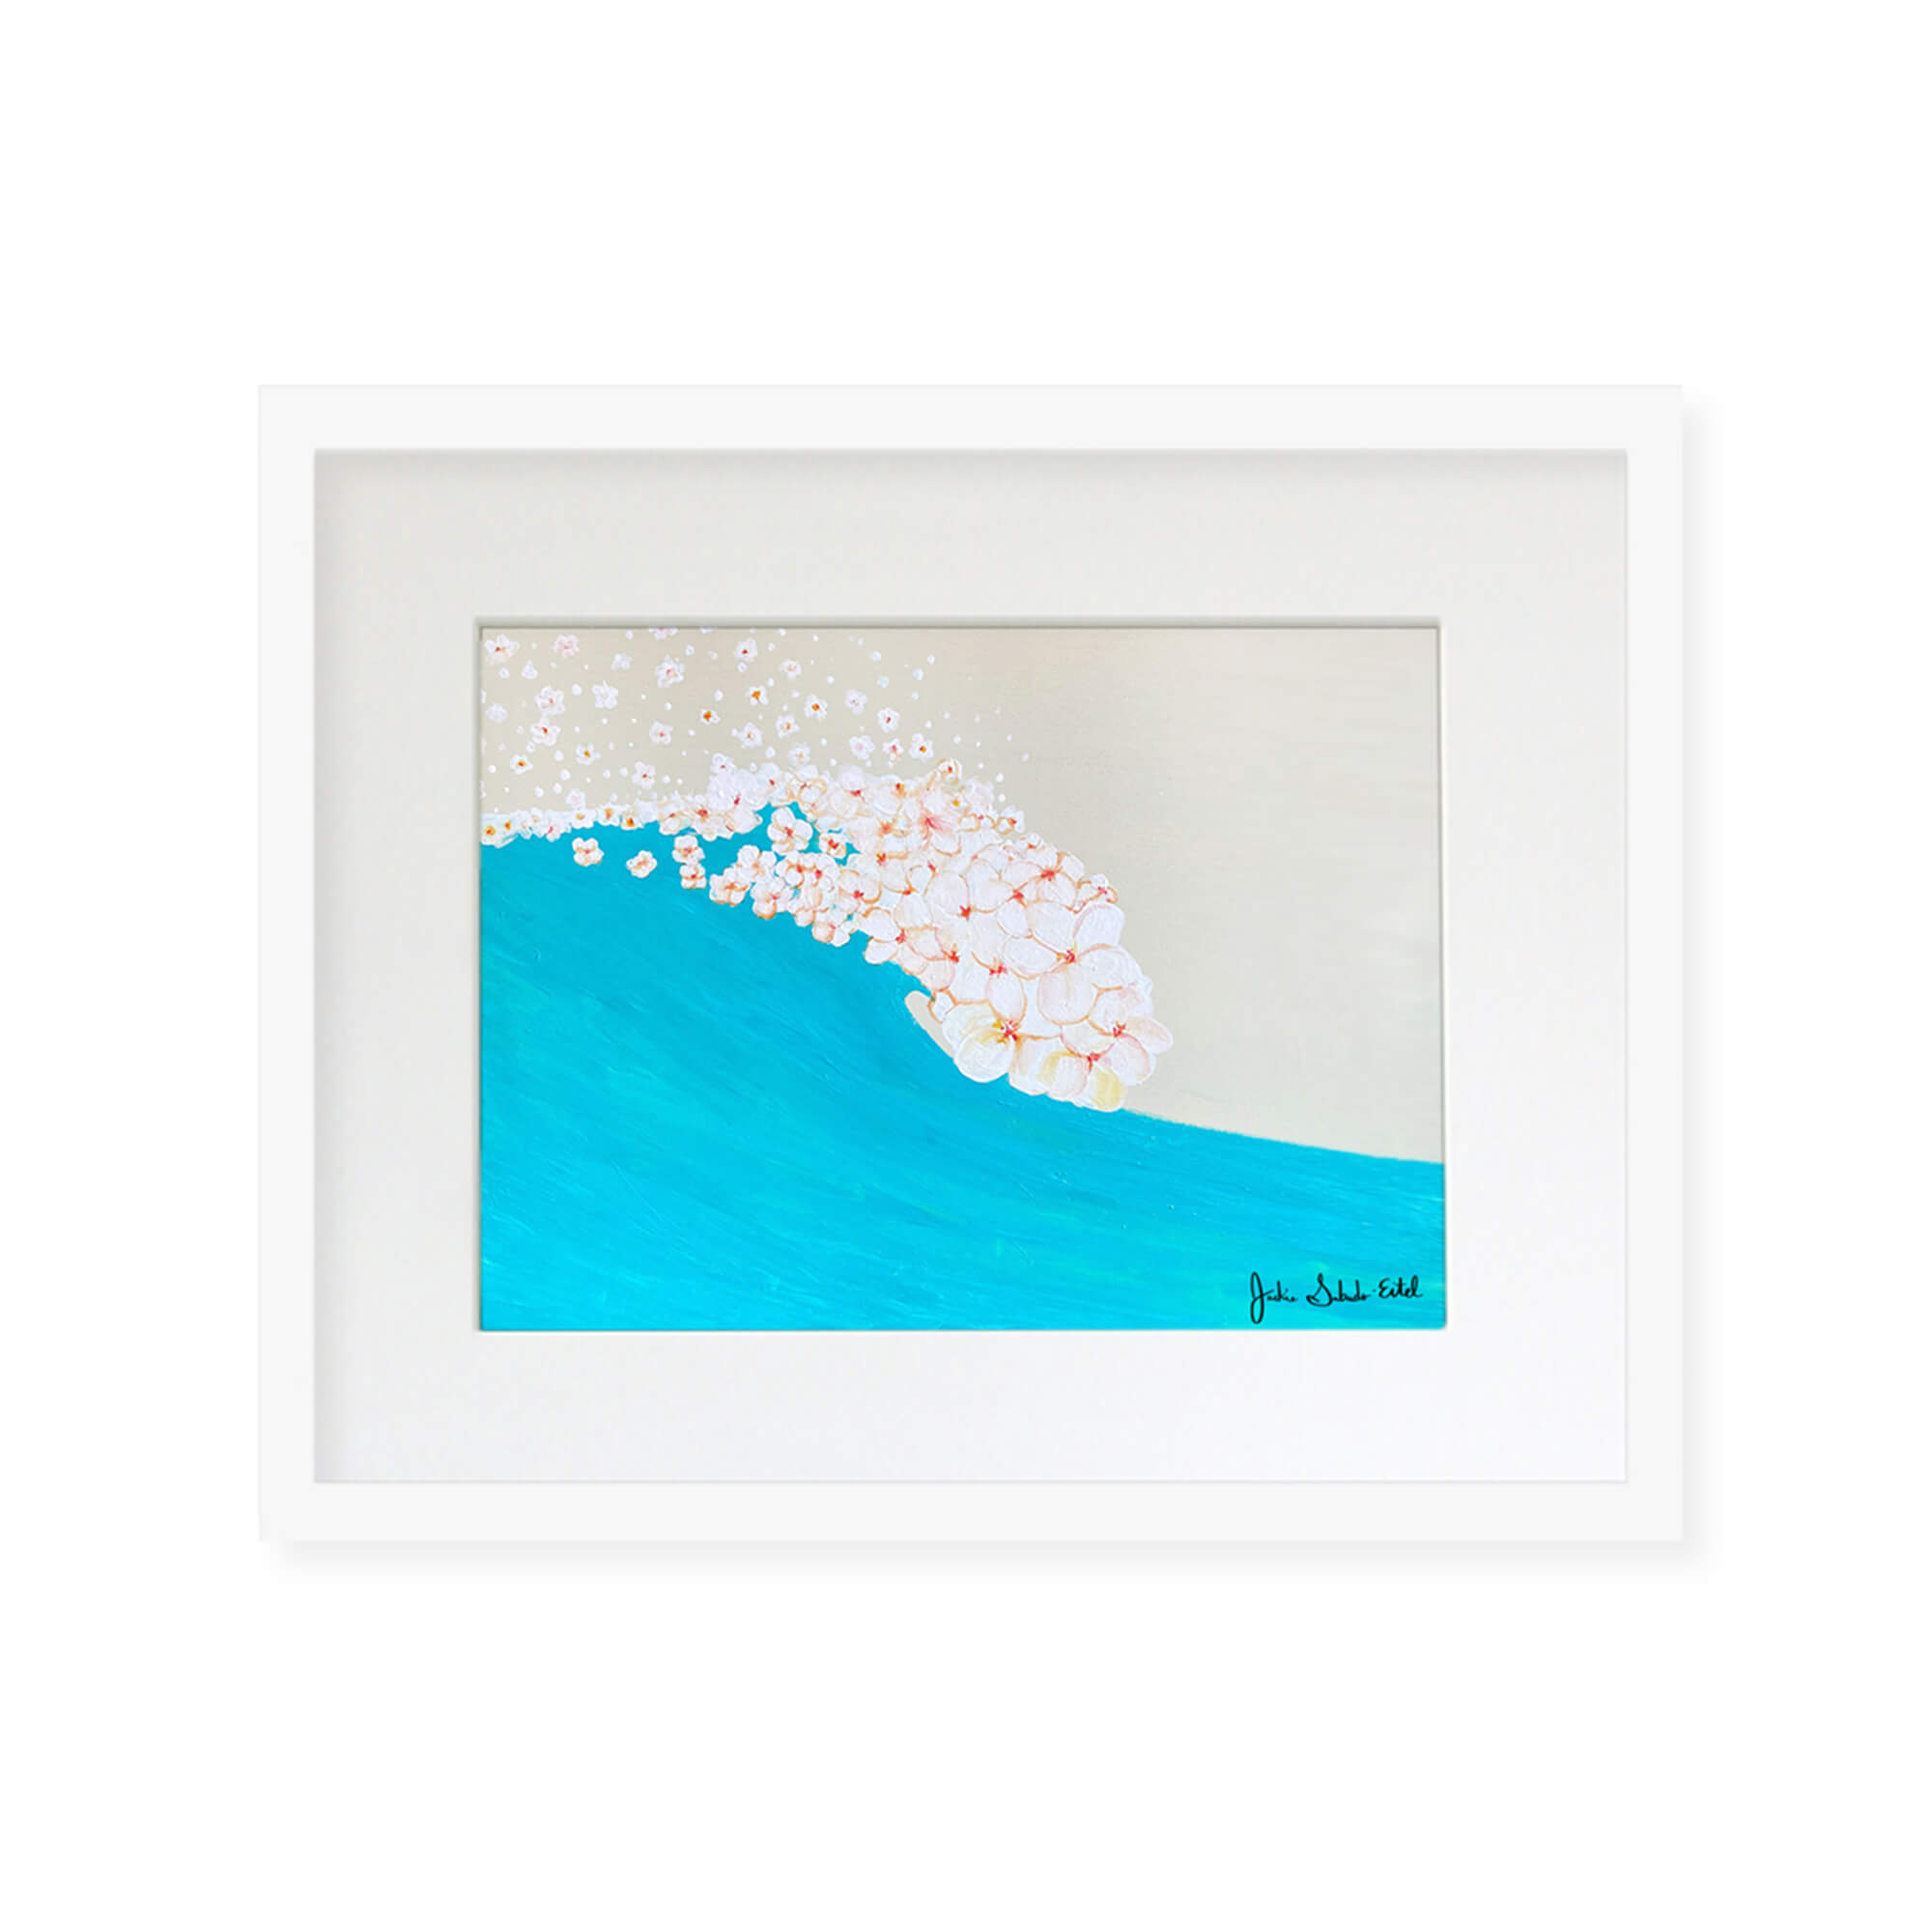 A framed matted art print featuring a top view of a shore with plumeria flowers as waves by Hawaii artist Jackie Eitel